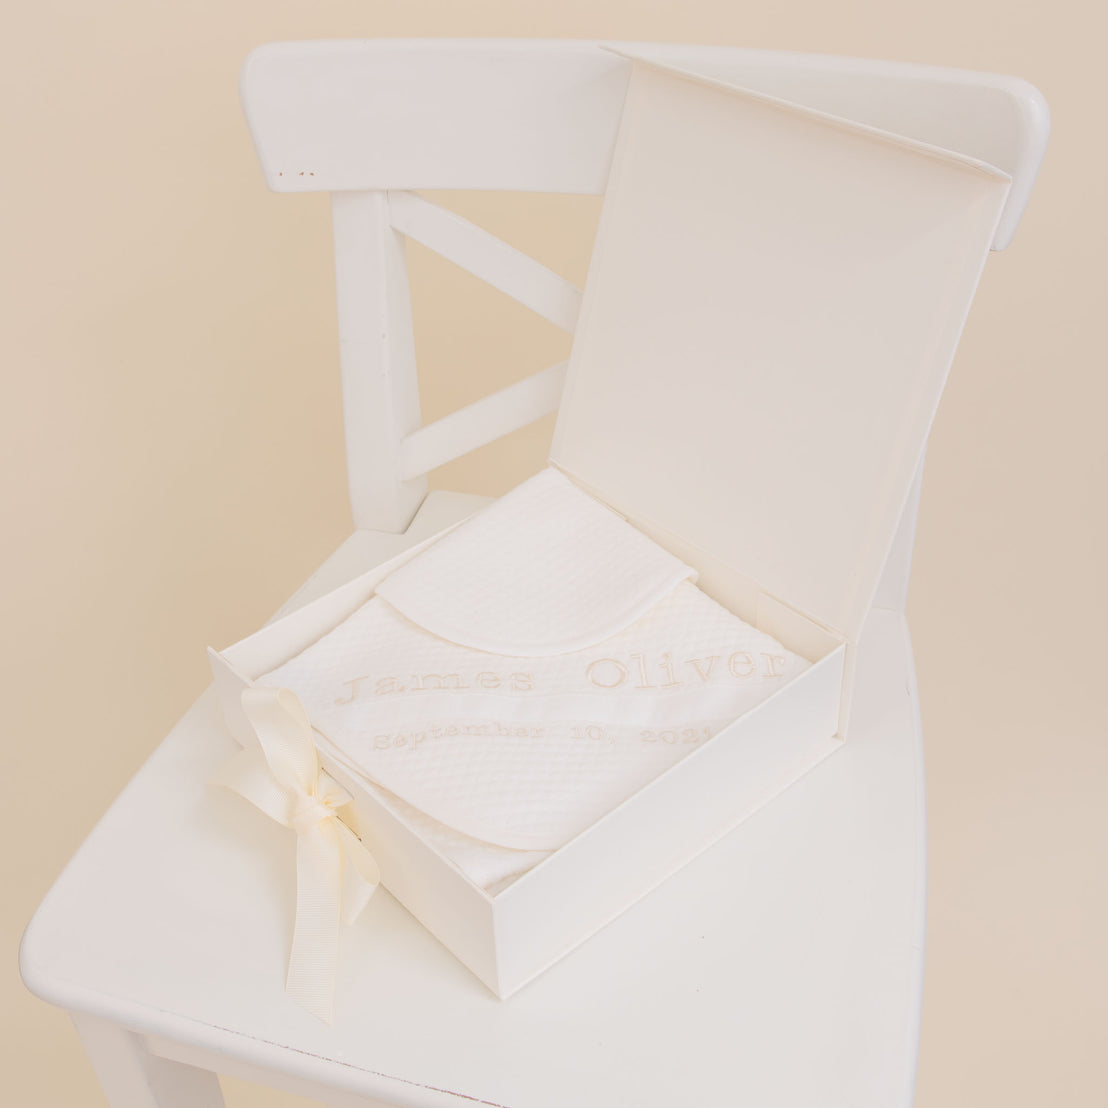 An elegant white wedding album with embroidered text "james oliver, september 10, 2023" on the cover, tied with a satin ribbon, placed on a white wooden chair against a Baby Beau & Belle Baby Boy Personalized Gift Set.